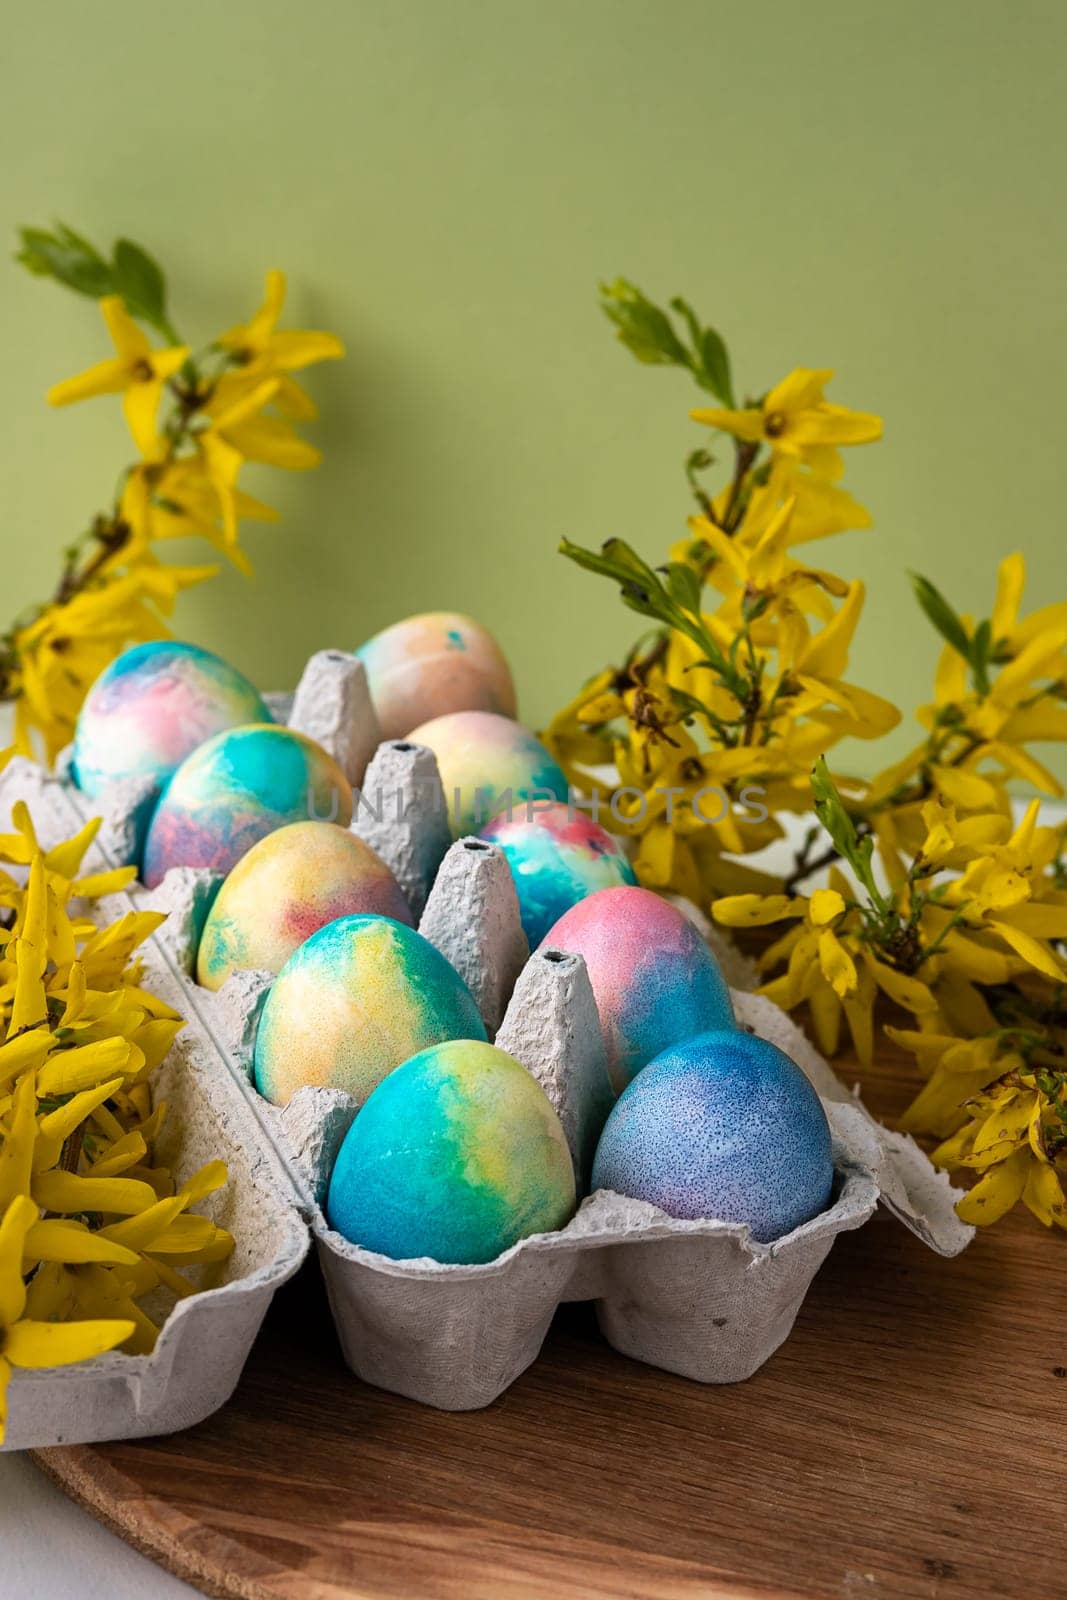 Happy Easter Easter eggs on rustic table with cherry blossoms. Natural dyed colorful eggs in paper tray on wooden board and spring flowers in rustic room. Moody atmospheric image